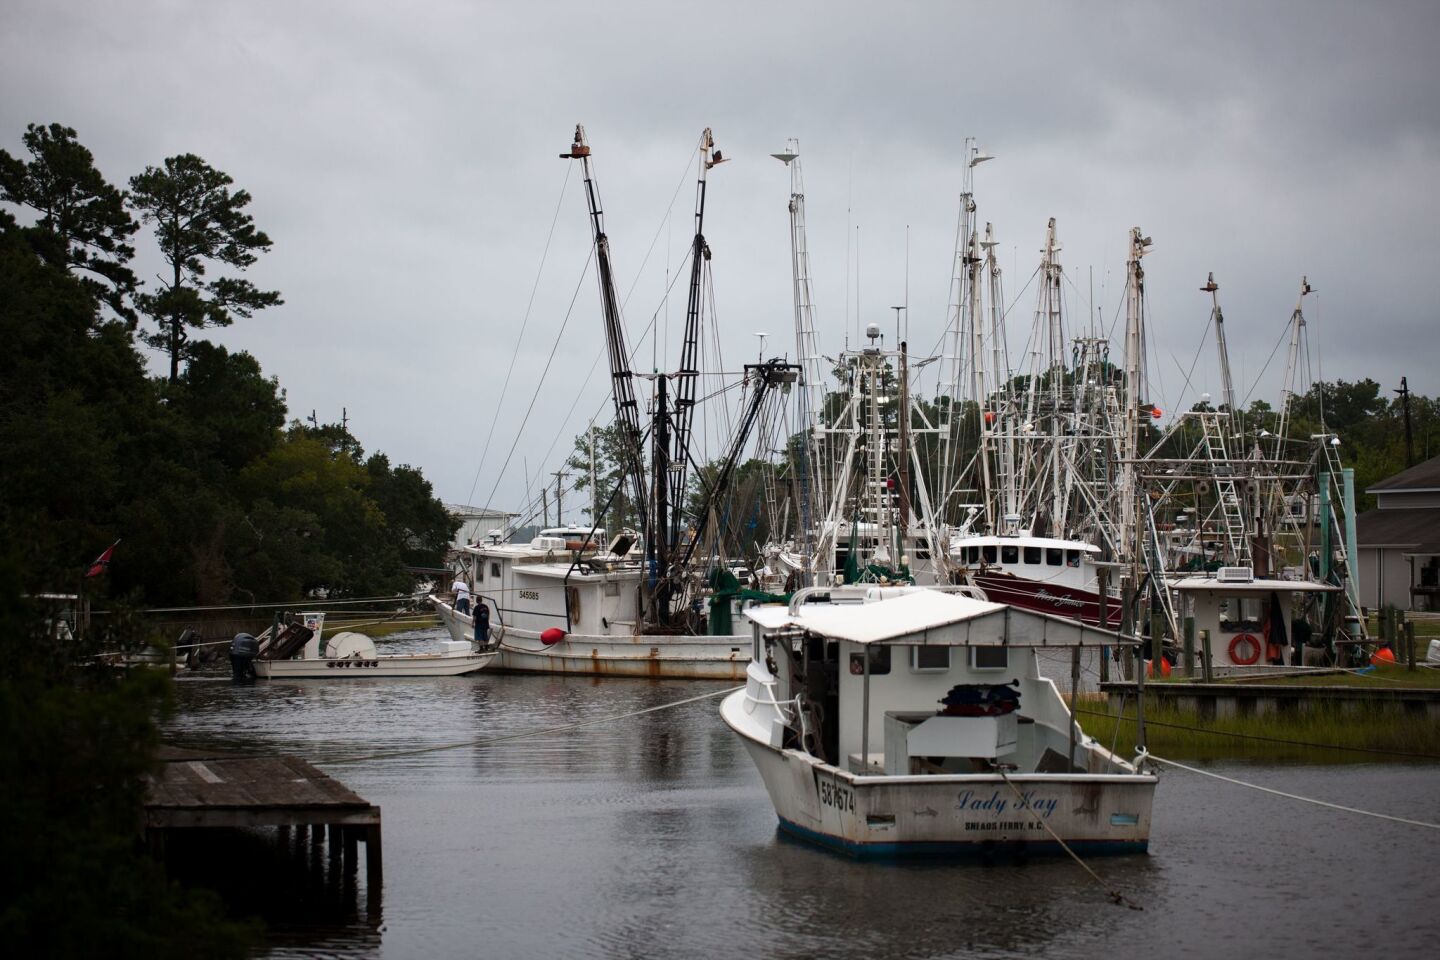 Shrimp boats are moored to the dock at Mitchell Seafood in Sneads Ferry, North Carolina on September 13, 2018 in advance of Hurricane Florence. - Hurricane Florence edged closer to the east coast of the US Thursday, with tropical-force winds and rain already lashing barrier islands just off the North Carolina mainland. The huge storm weakened to a Category 2 hurricane overnight, but forecasters warned that it still packed a dangerous punch, 110 mile-an-hour (175 kph) winds and torrential rains.